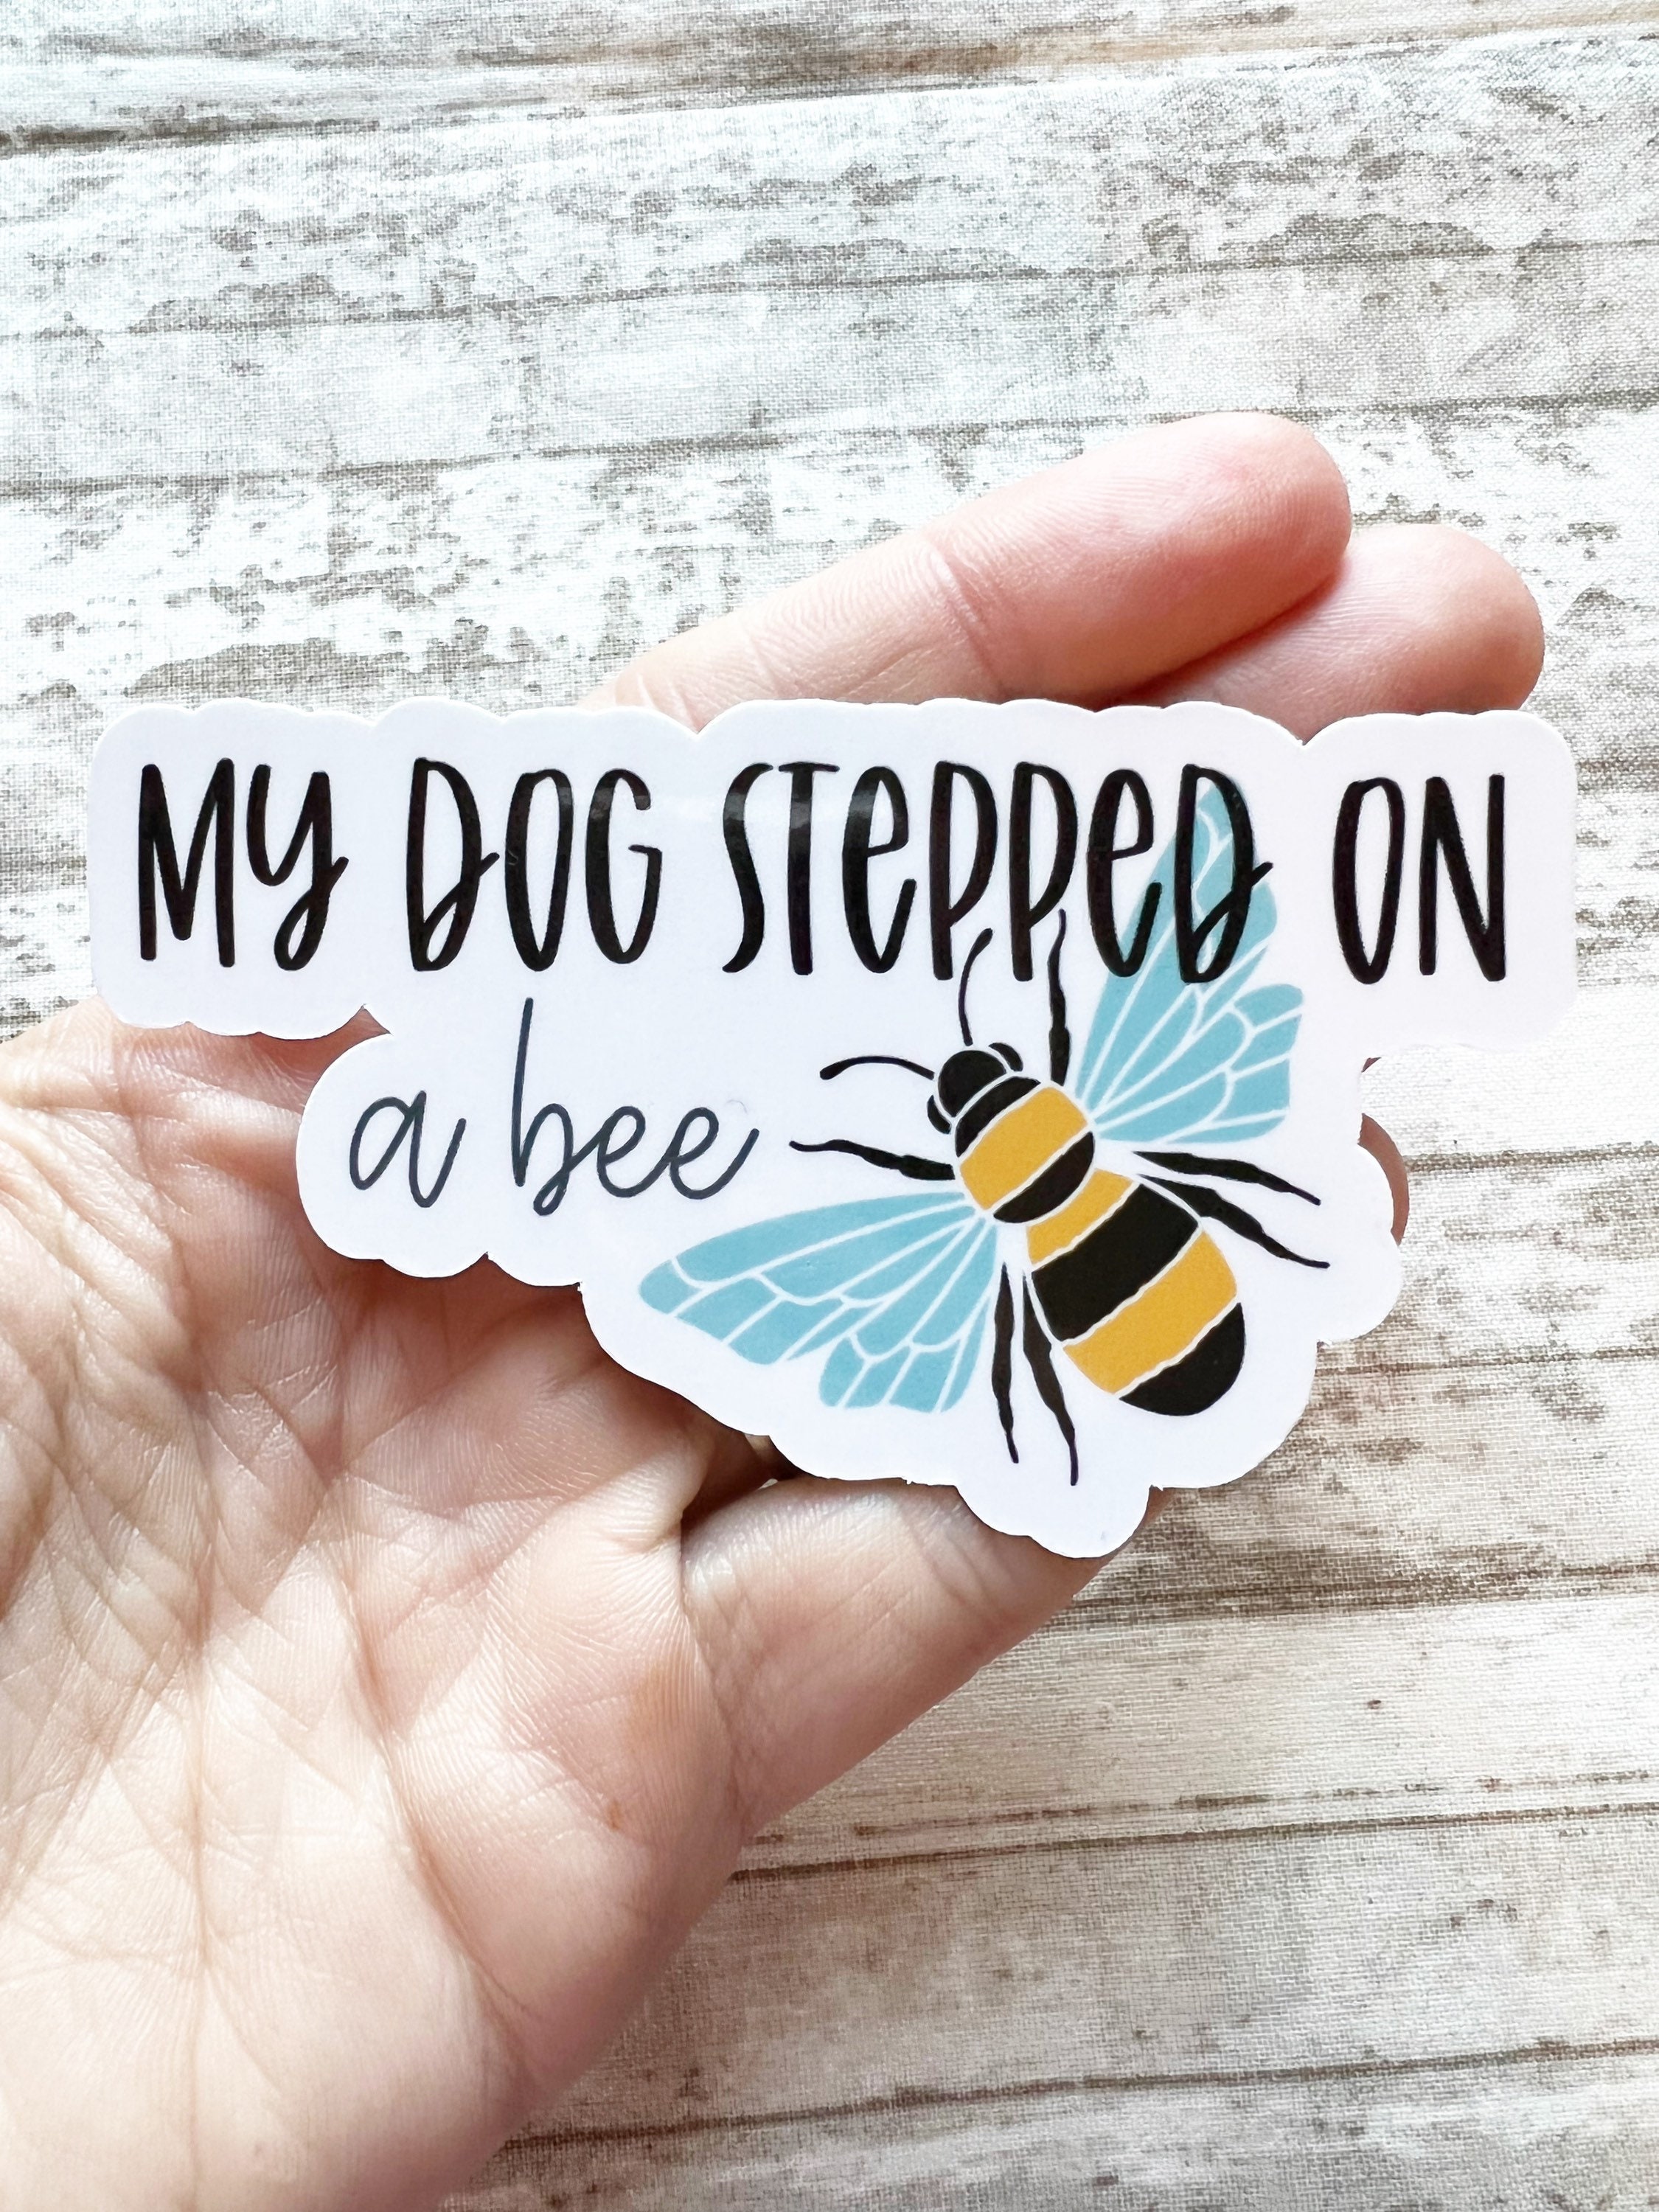 My dog stepped on a bee  Sticker for Sale by clients